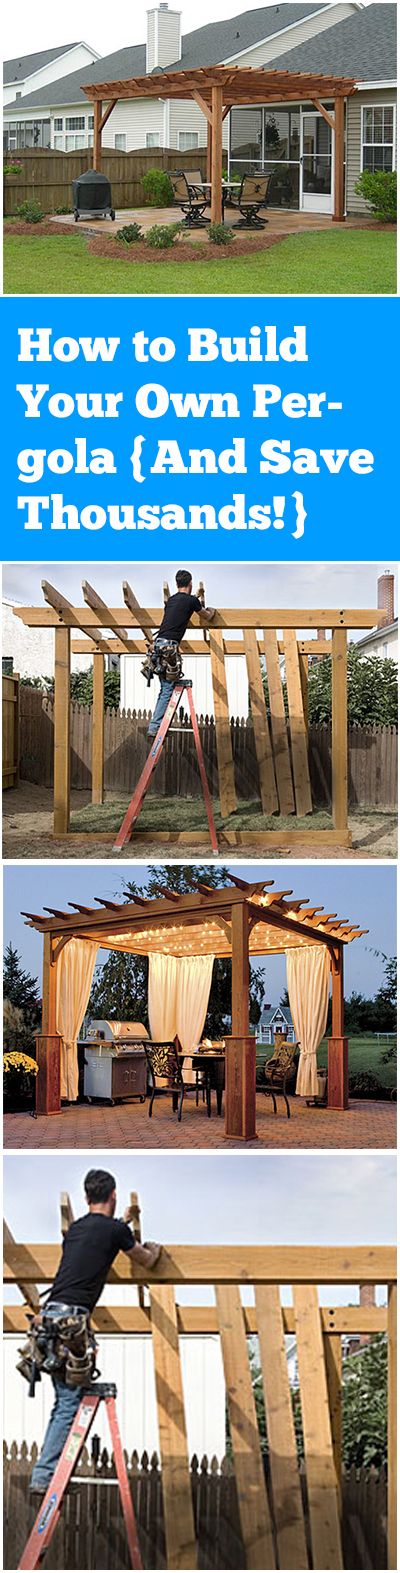 How to Build Your Own Pergola {And Save Thousands!}